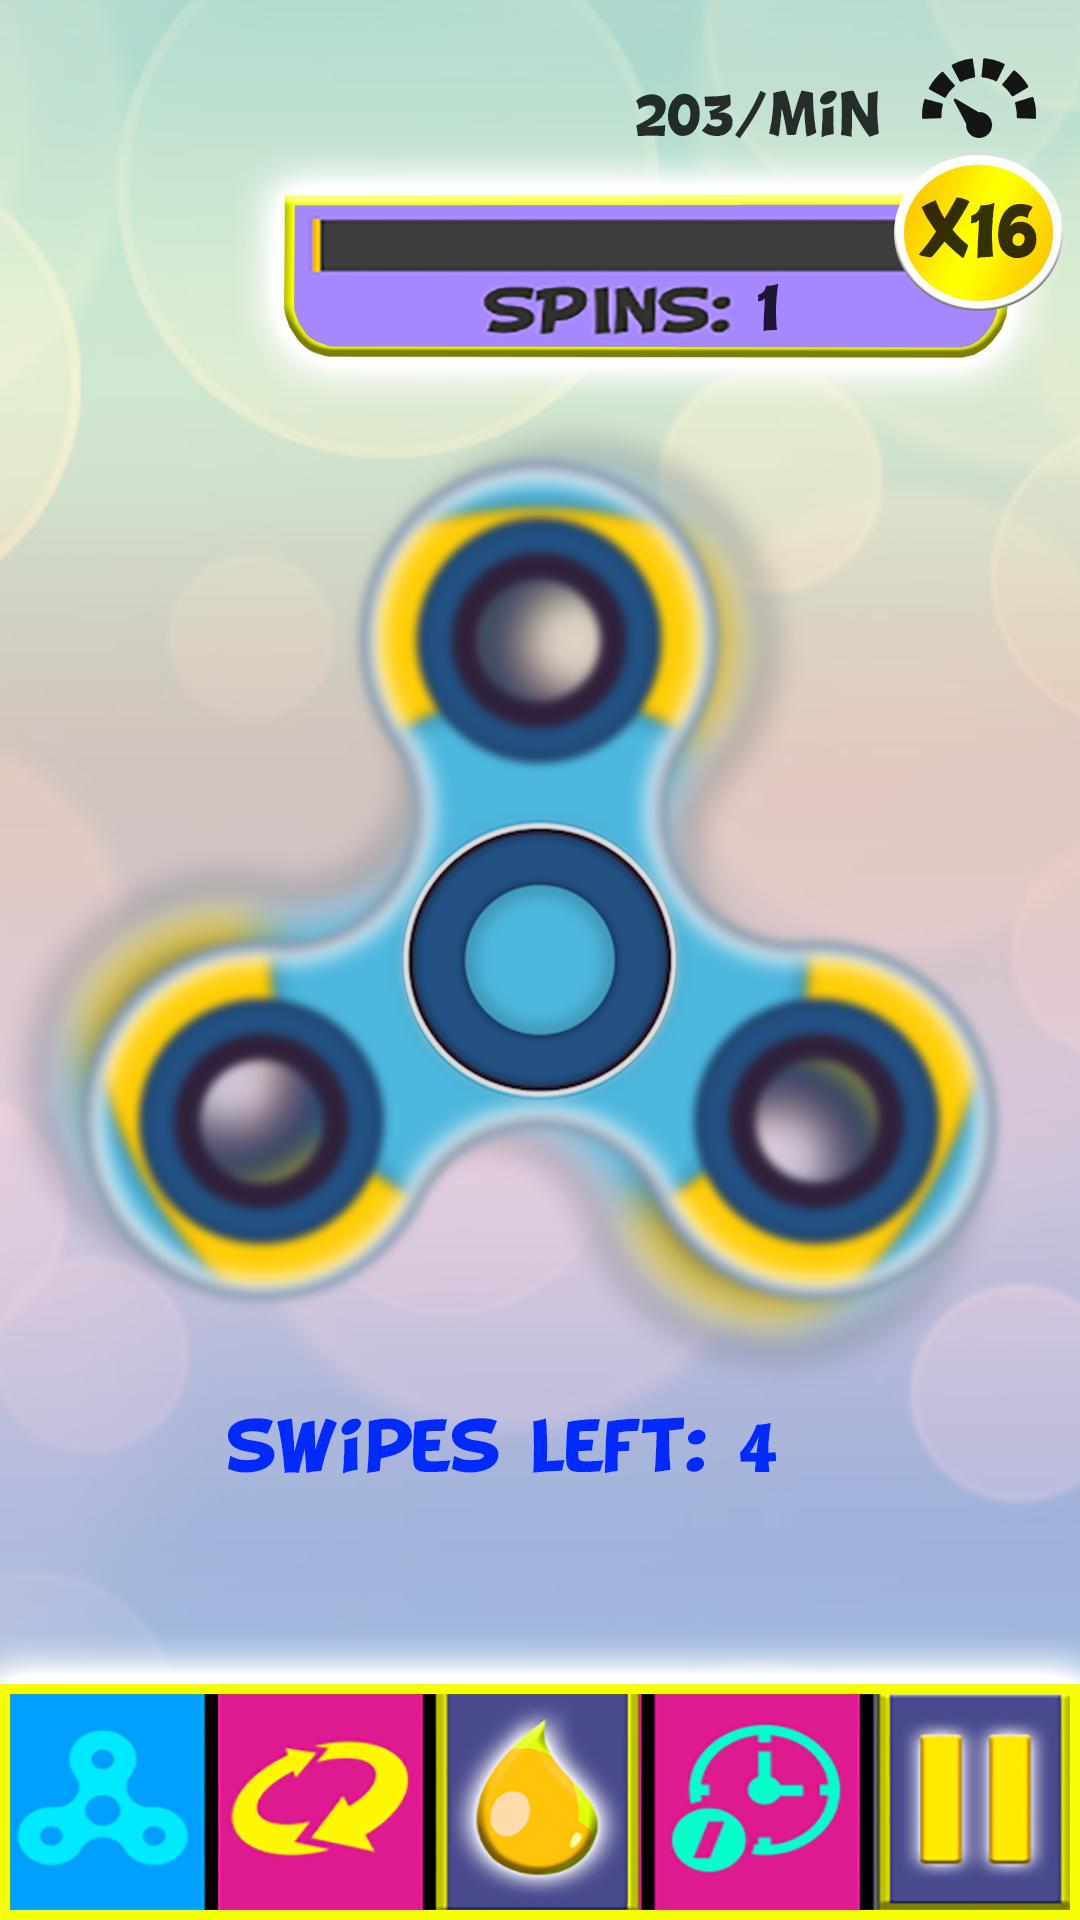 Spin play. Spin Android физика игра. Spin Roll. Acedcd Fidget Gun.